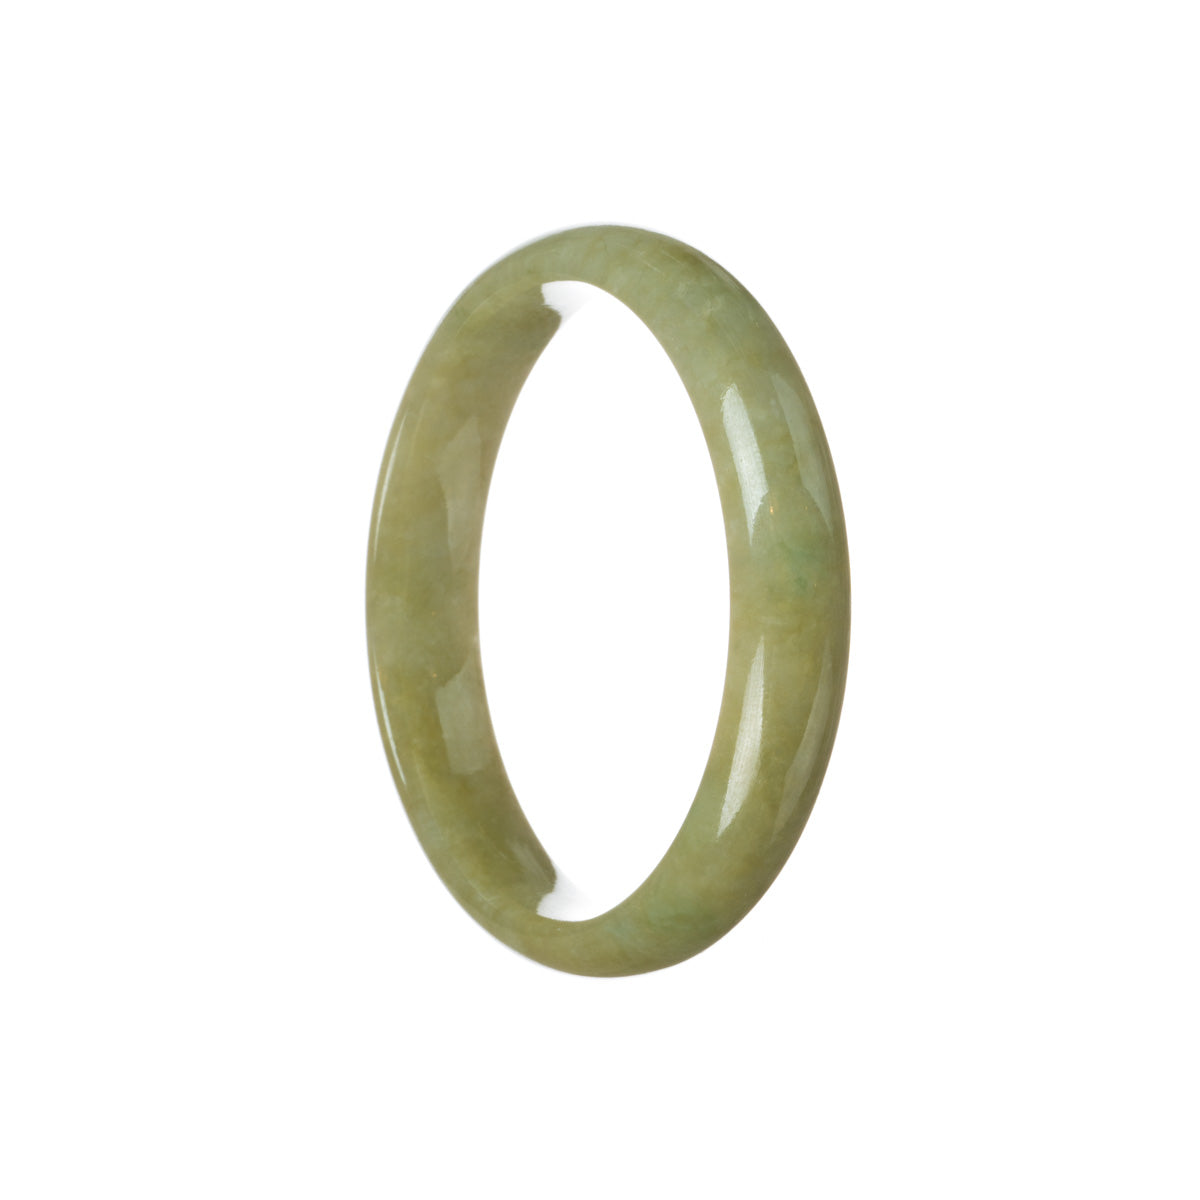 A beautiful, high-quality jade bracelet in a brownish olive green color. It features a half-moon design and is certified as Grade A. Perfect for adding a touch of elegance to any outfit.